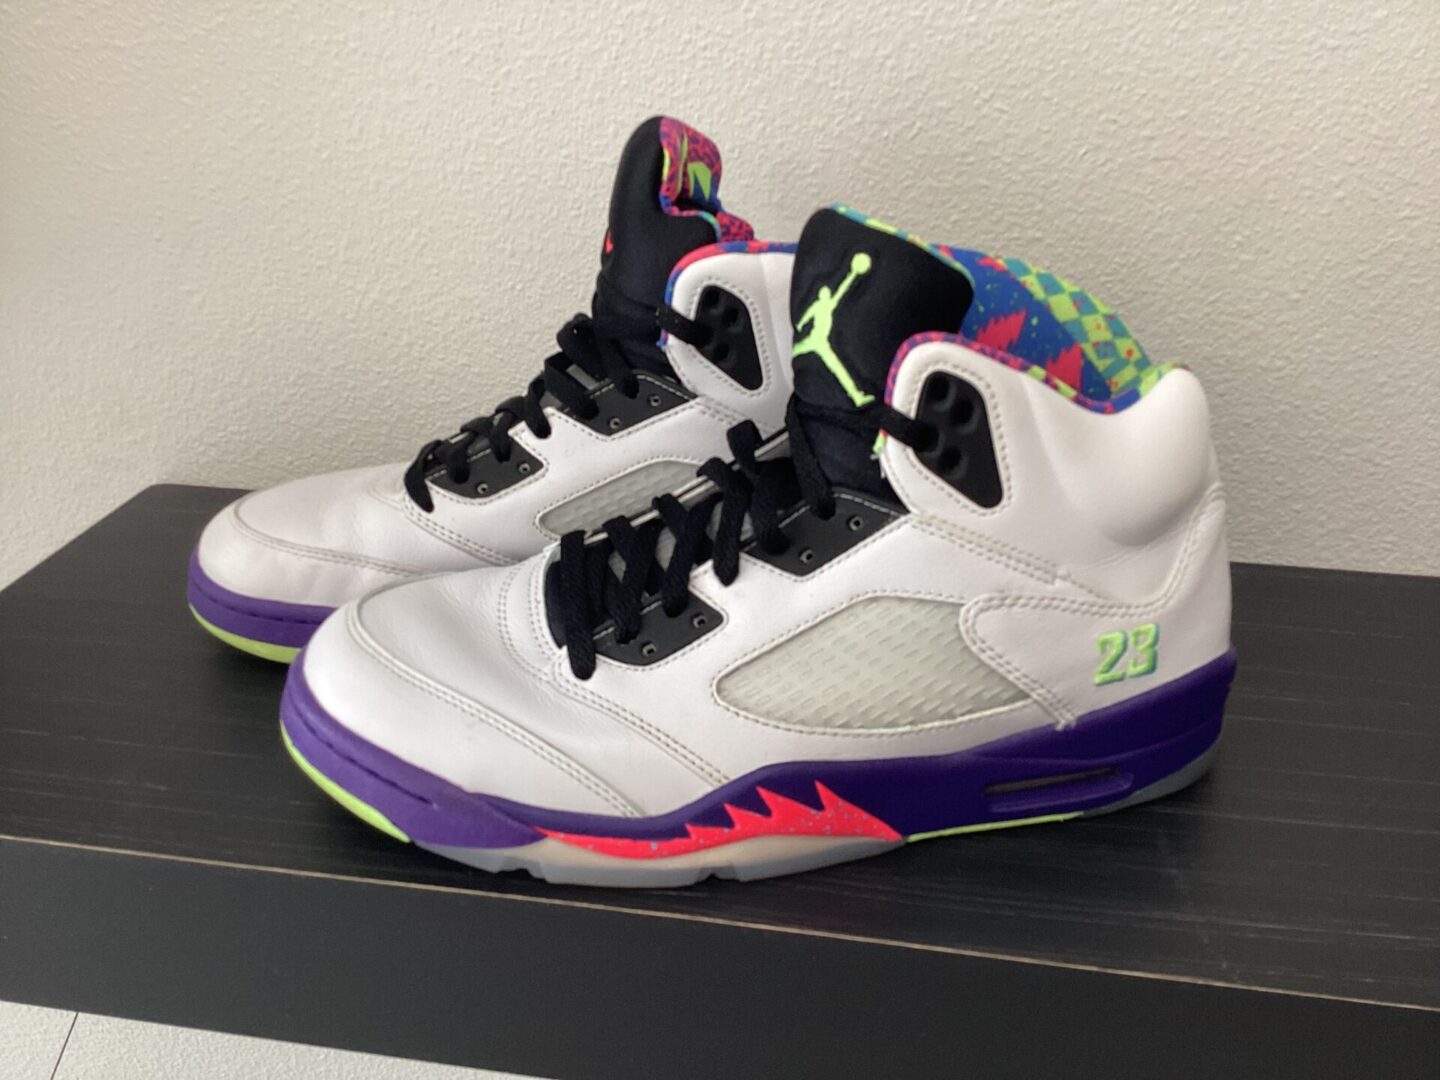 A pair of Pre owned- Jordan 5 Prince sneakers with a white and gray upper, colorful inner lining, and a purple and red sole on a black shelf.